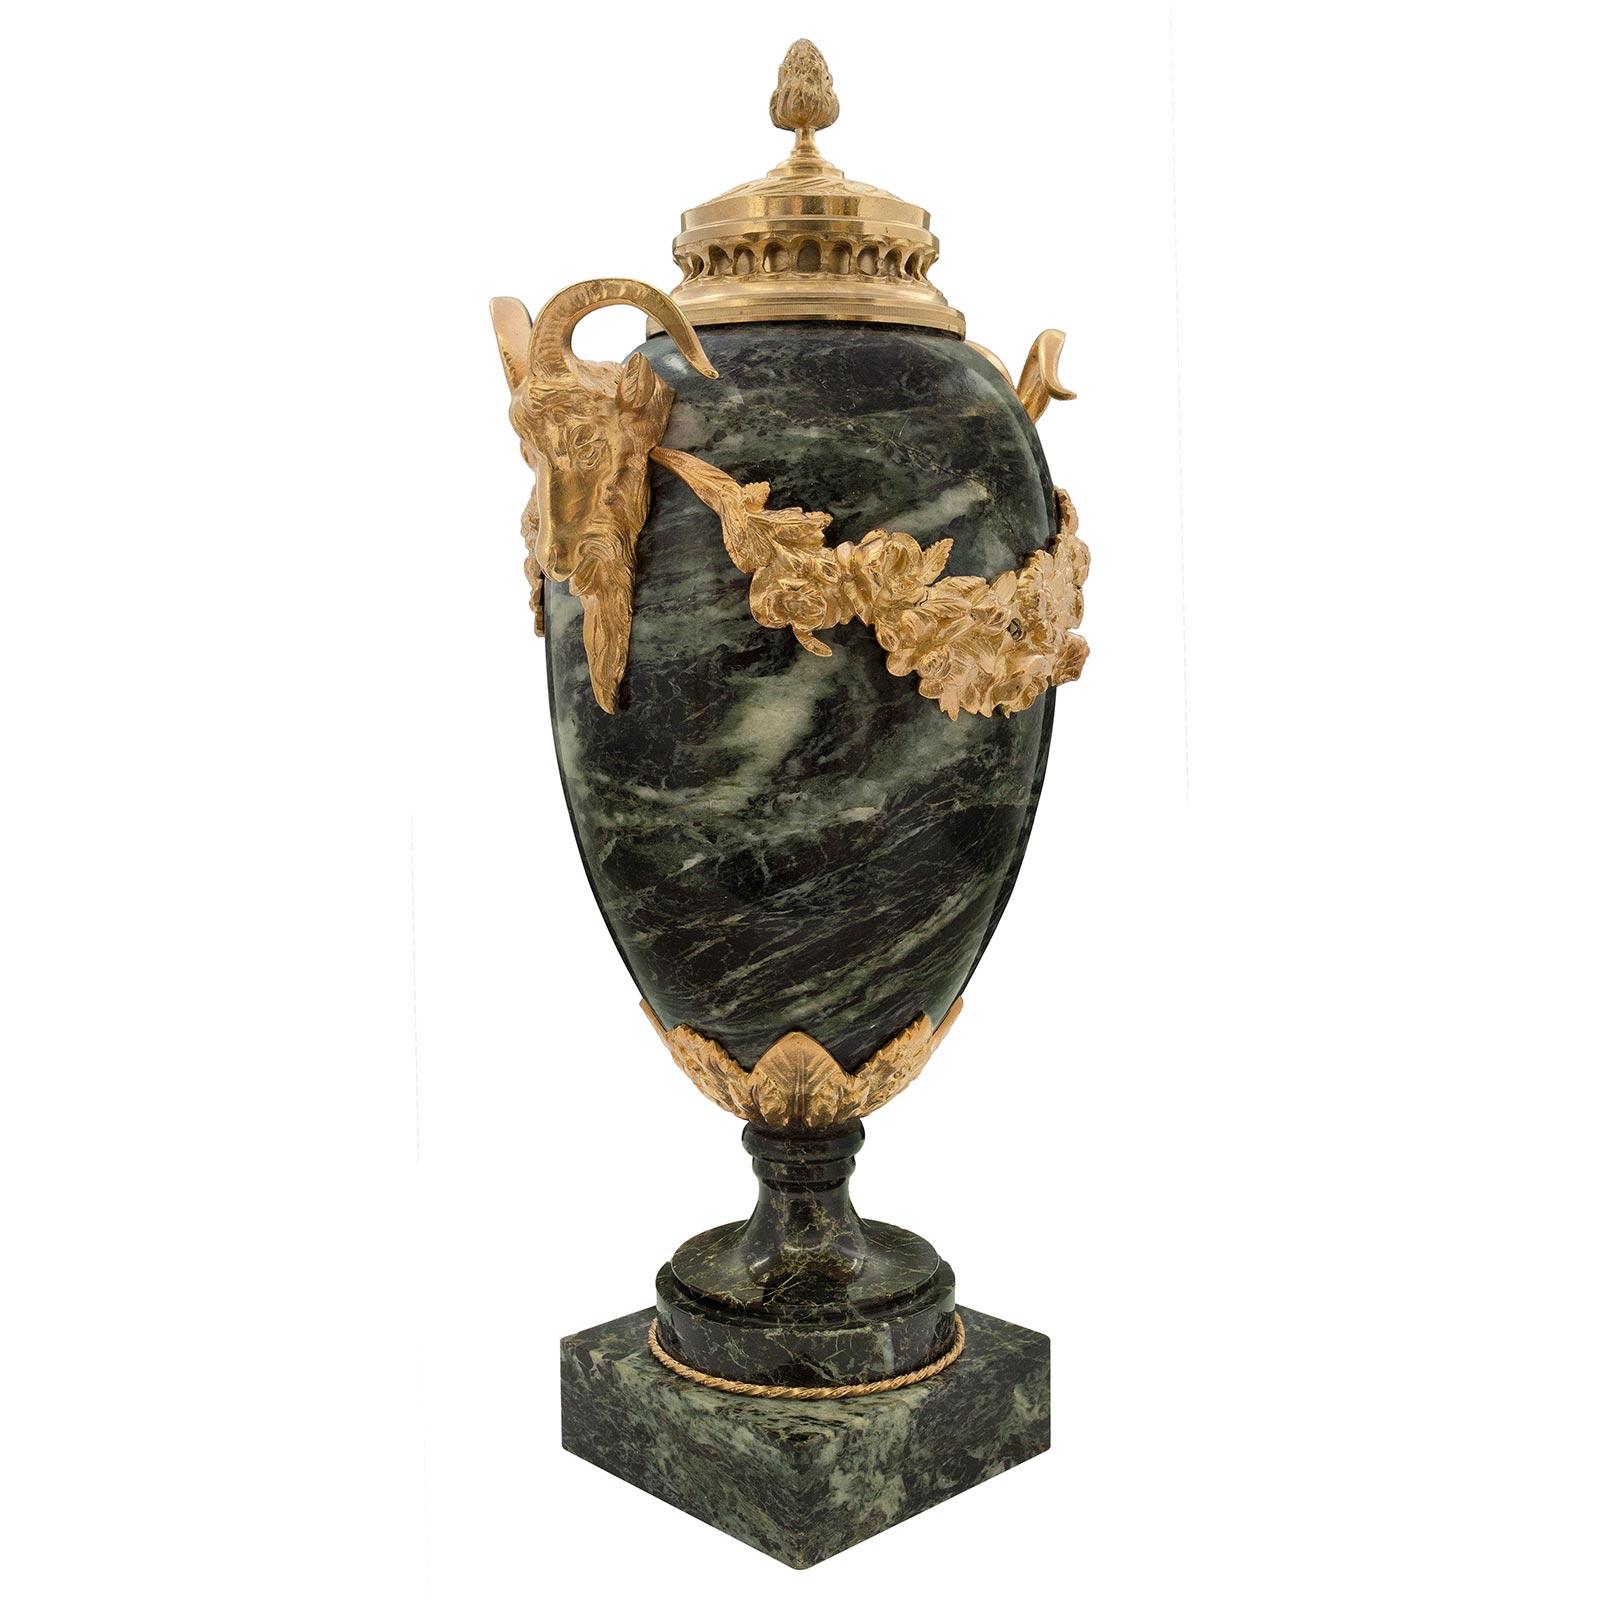 A most elegant pair of French 19th century Louis XVI st. Vert de Patricia marble and ormolu lidded urns. Each urn is raised by a square marble base with a fine circular twisted designed ormolu trim below the socle pedestal with a mottled border.